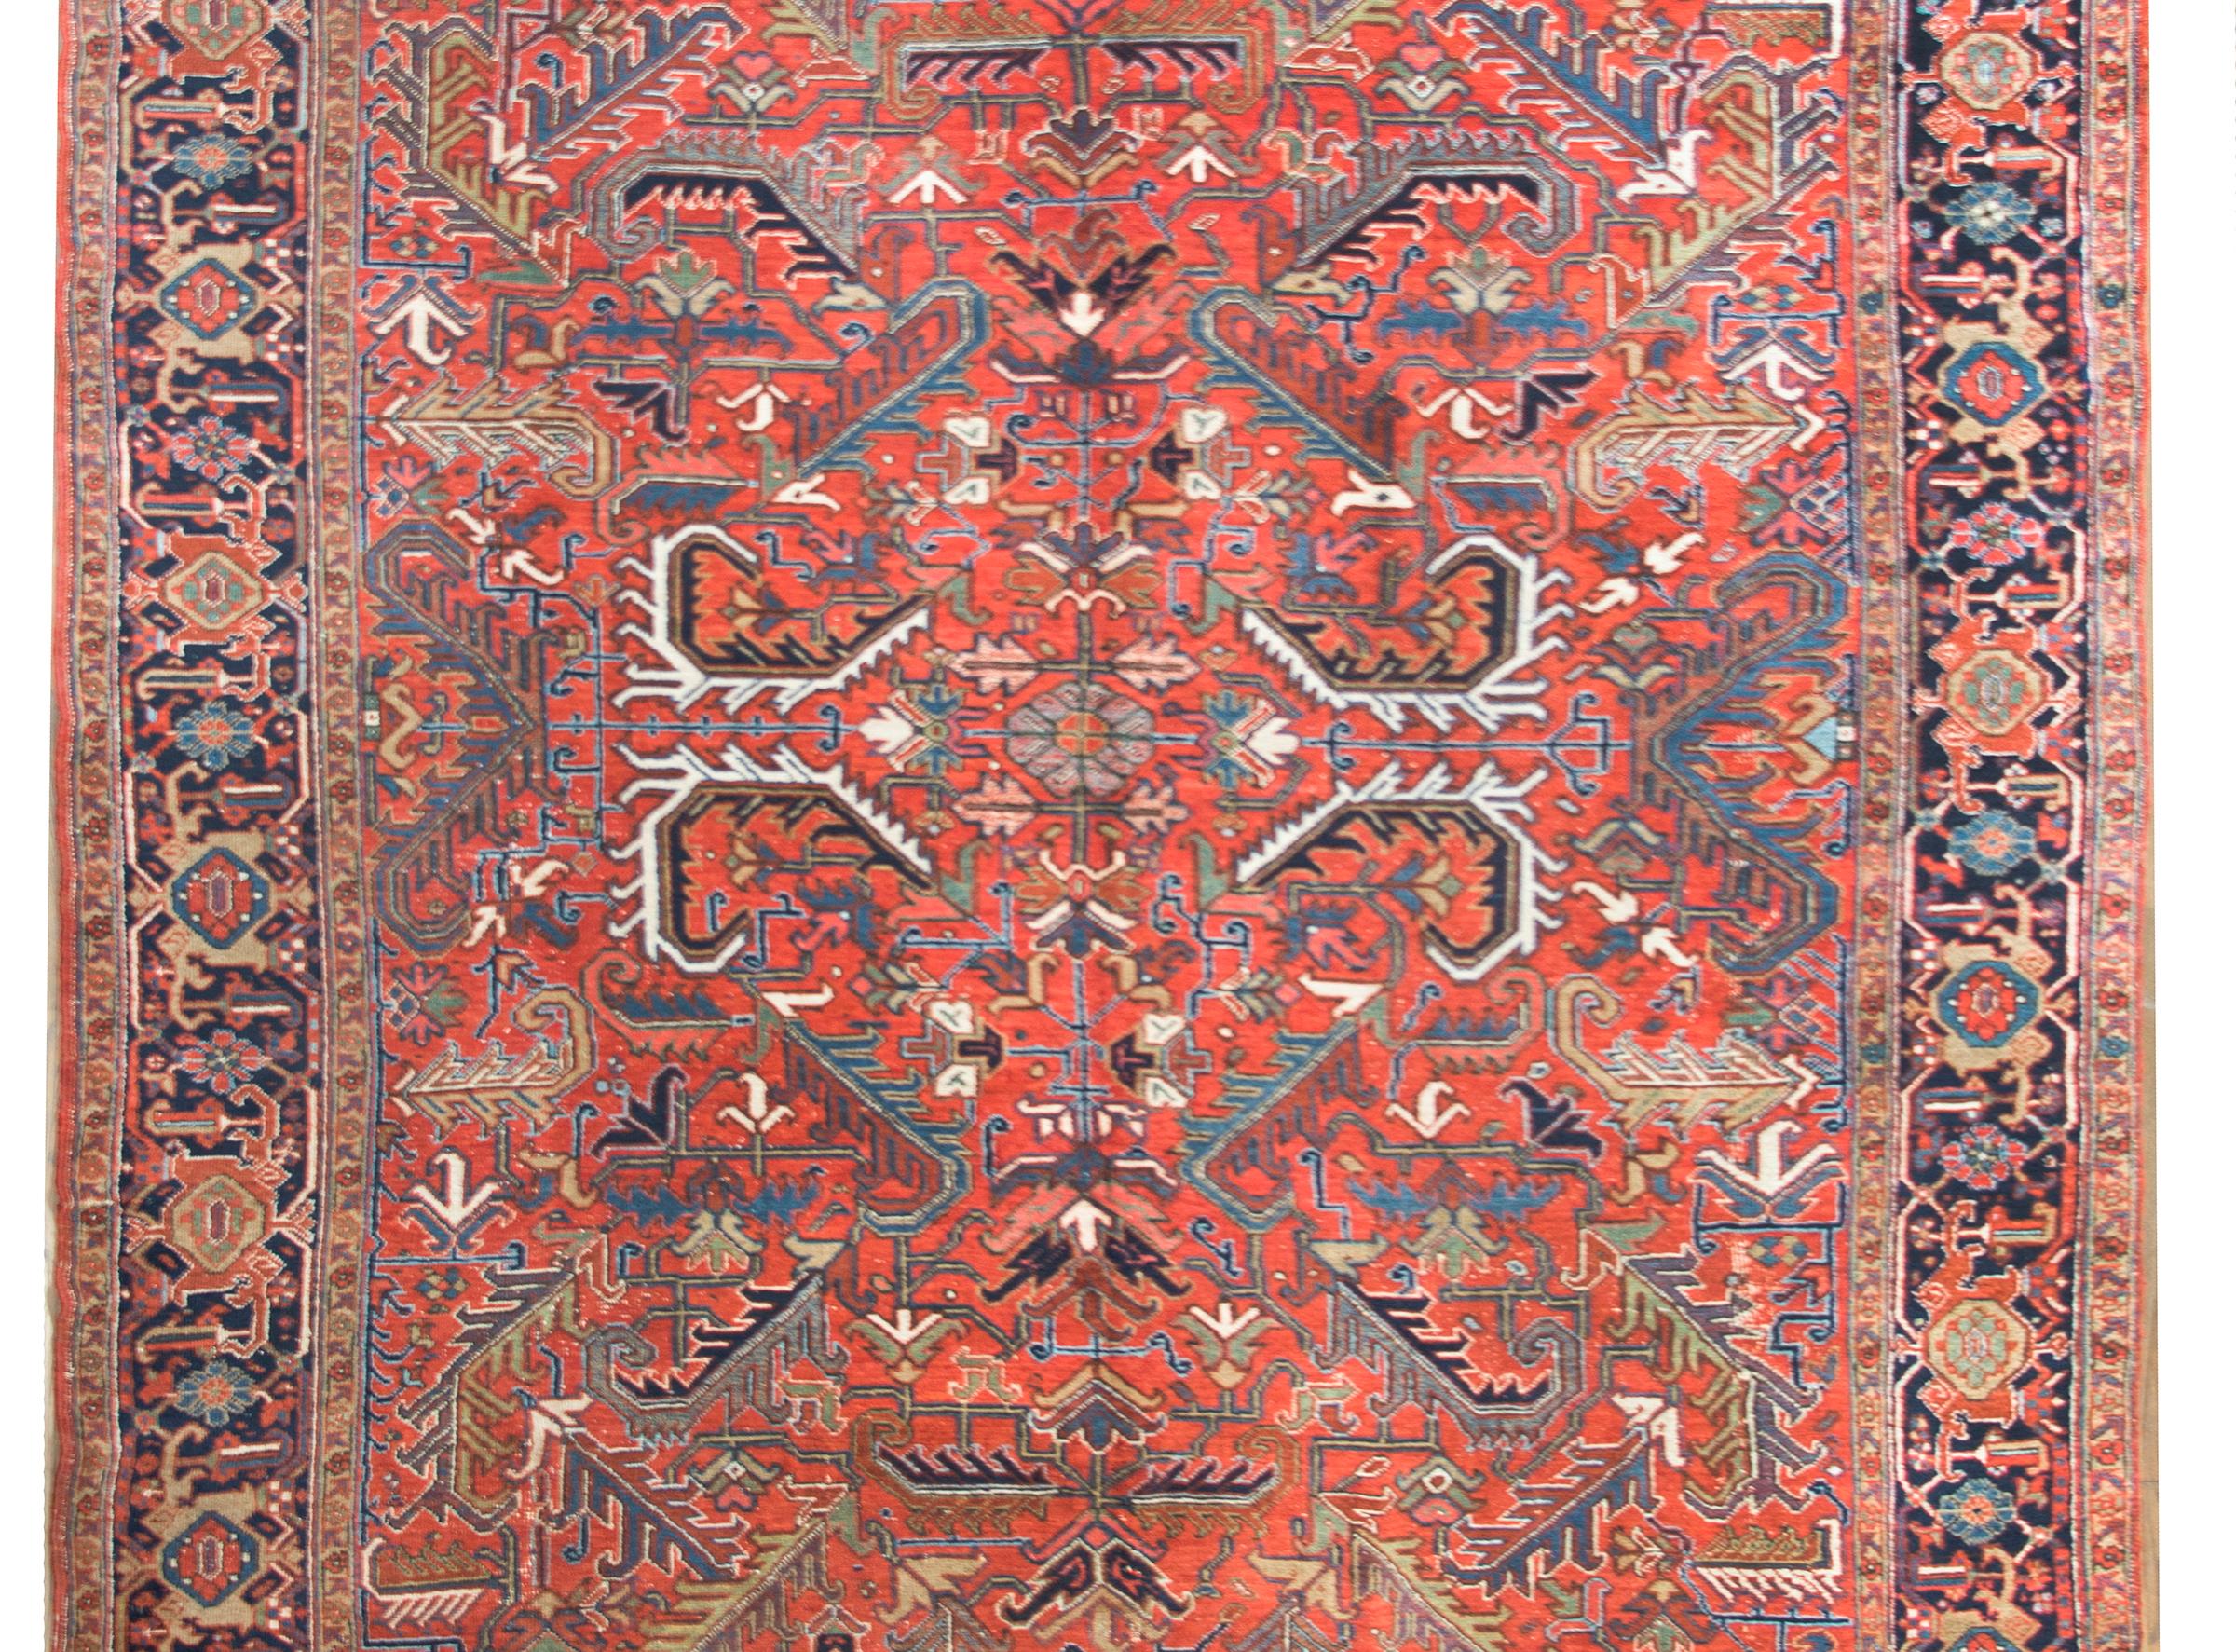 A wonderful early 20th century Persian Heriz rug with a large-scale mirrored floral and leaf pattern woven in tradition Heriz colors of crimson, light and dark indigo, white, pink and cream, and surrounded by a fantastic border with a wide central